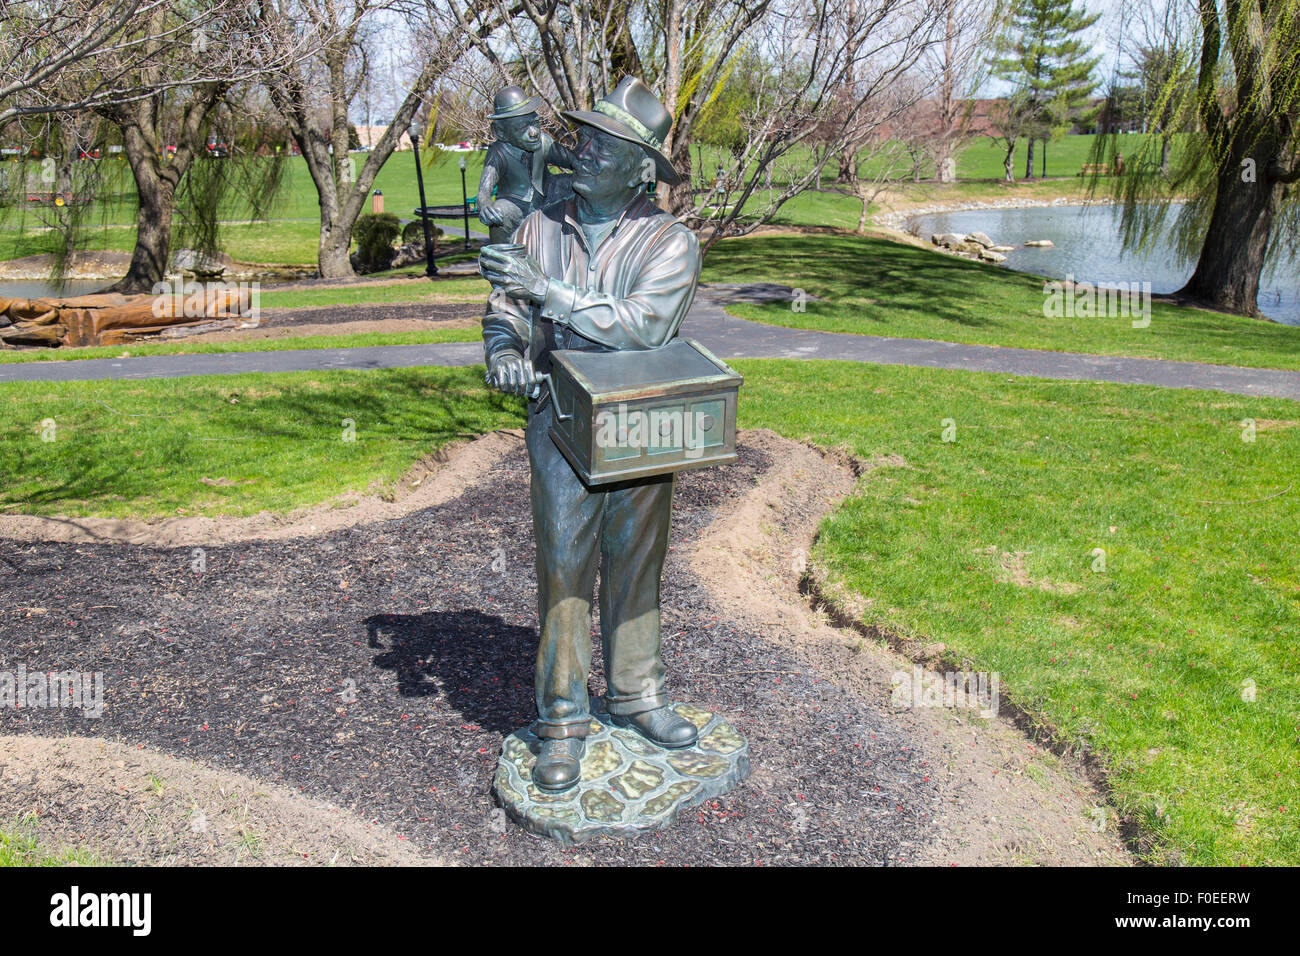 Monkey grinder sculpture at a suburban park known as Greenfield near Lancaster, PA. Stock Photo